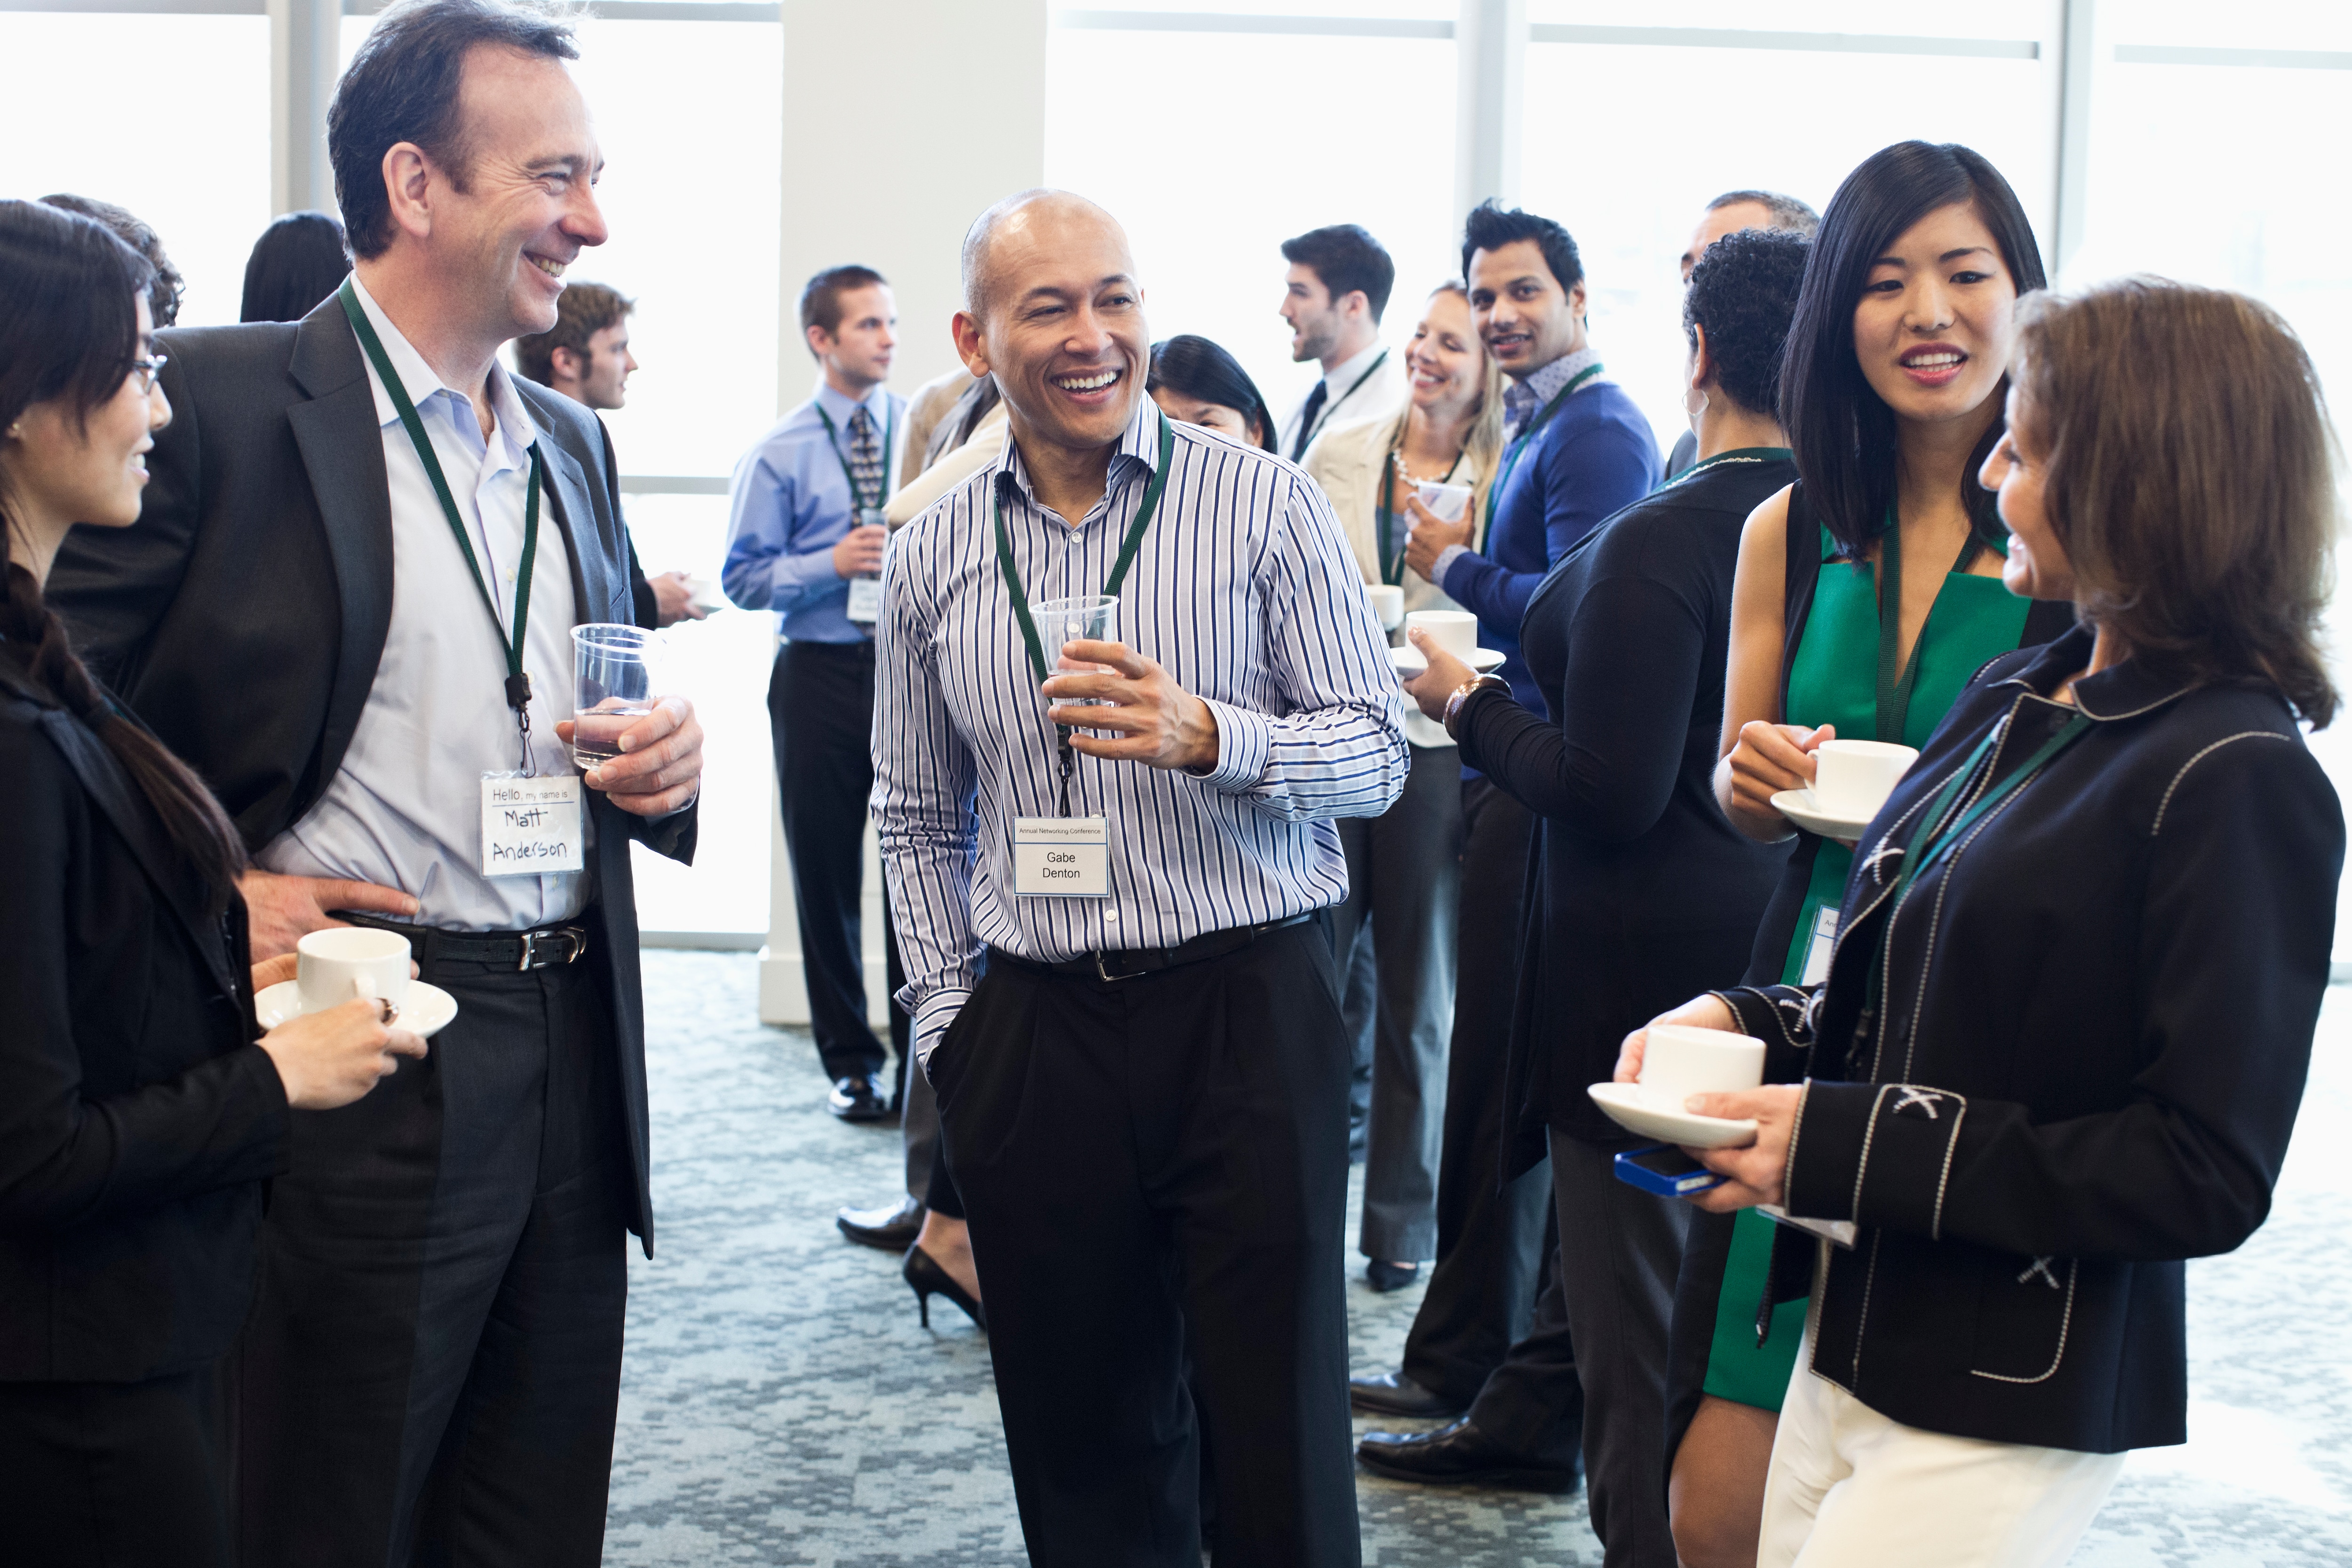 Group of people chatting at a corporate event